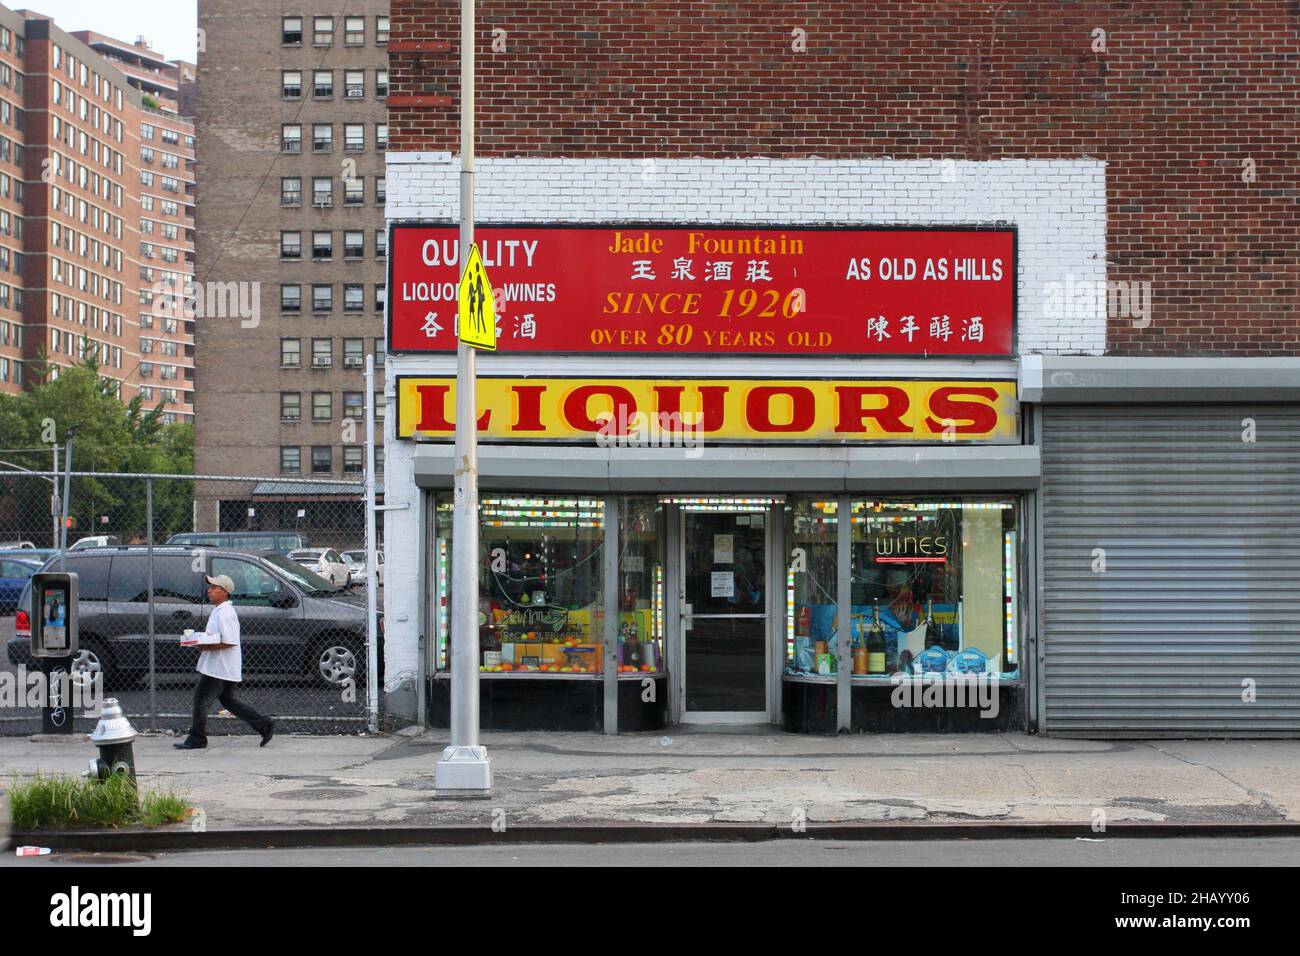 [historical storefront] Jade Fountain, 123 Delancey St, New York, NYC storefront photo of a liquor store, 'As old as hills'. Stock Photo